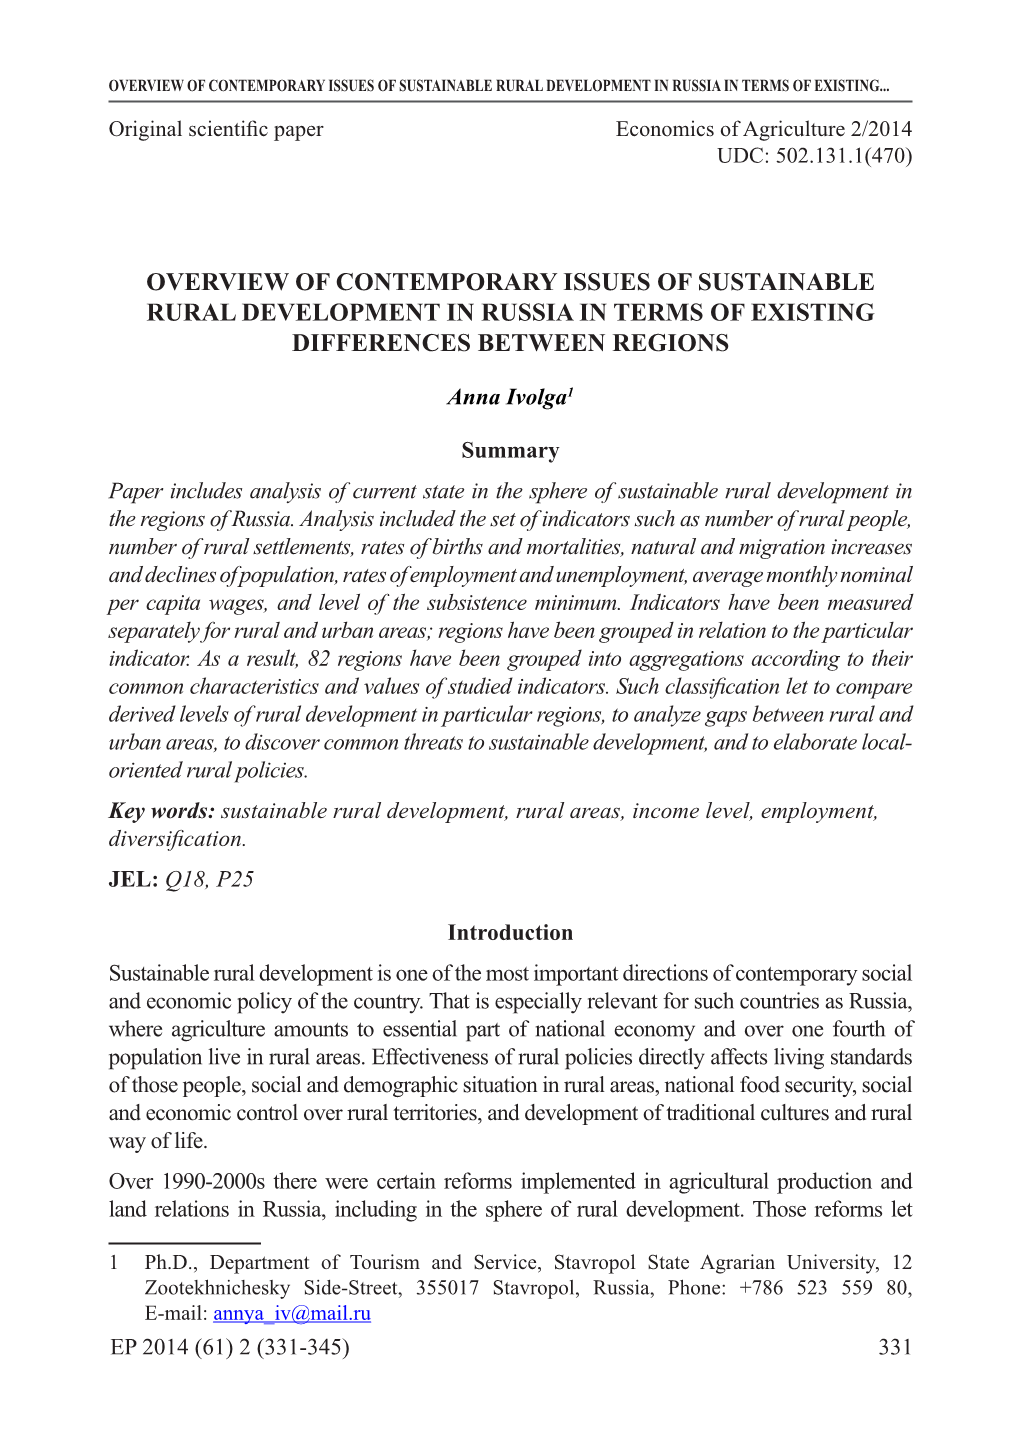 Overview of Contemporary Issues of Sustainable Rural Development in Russia in Terms of Existing